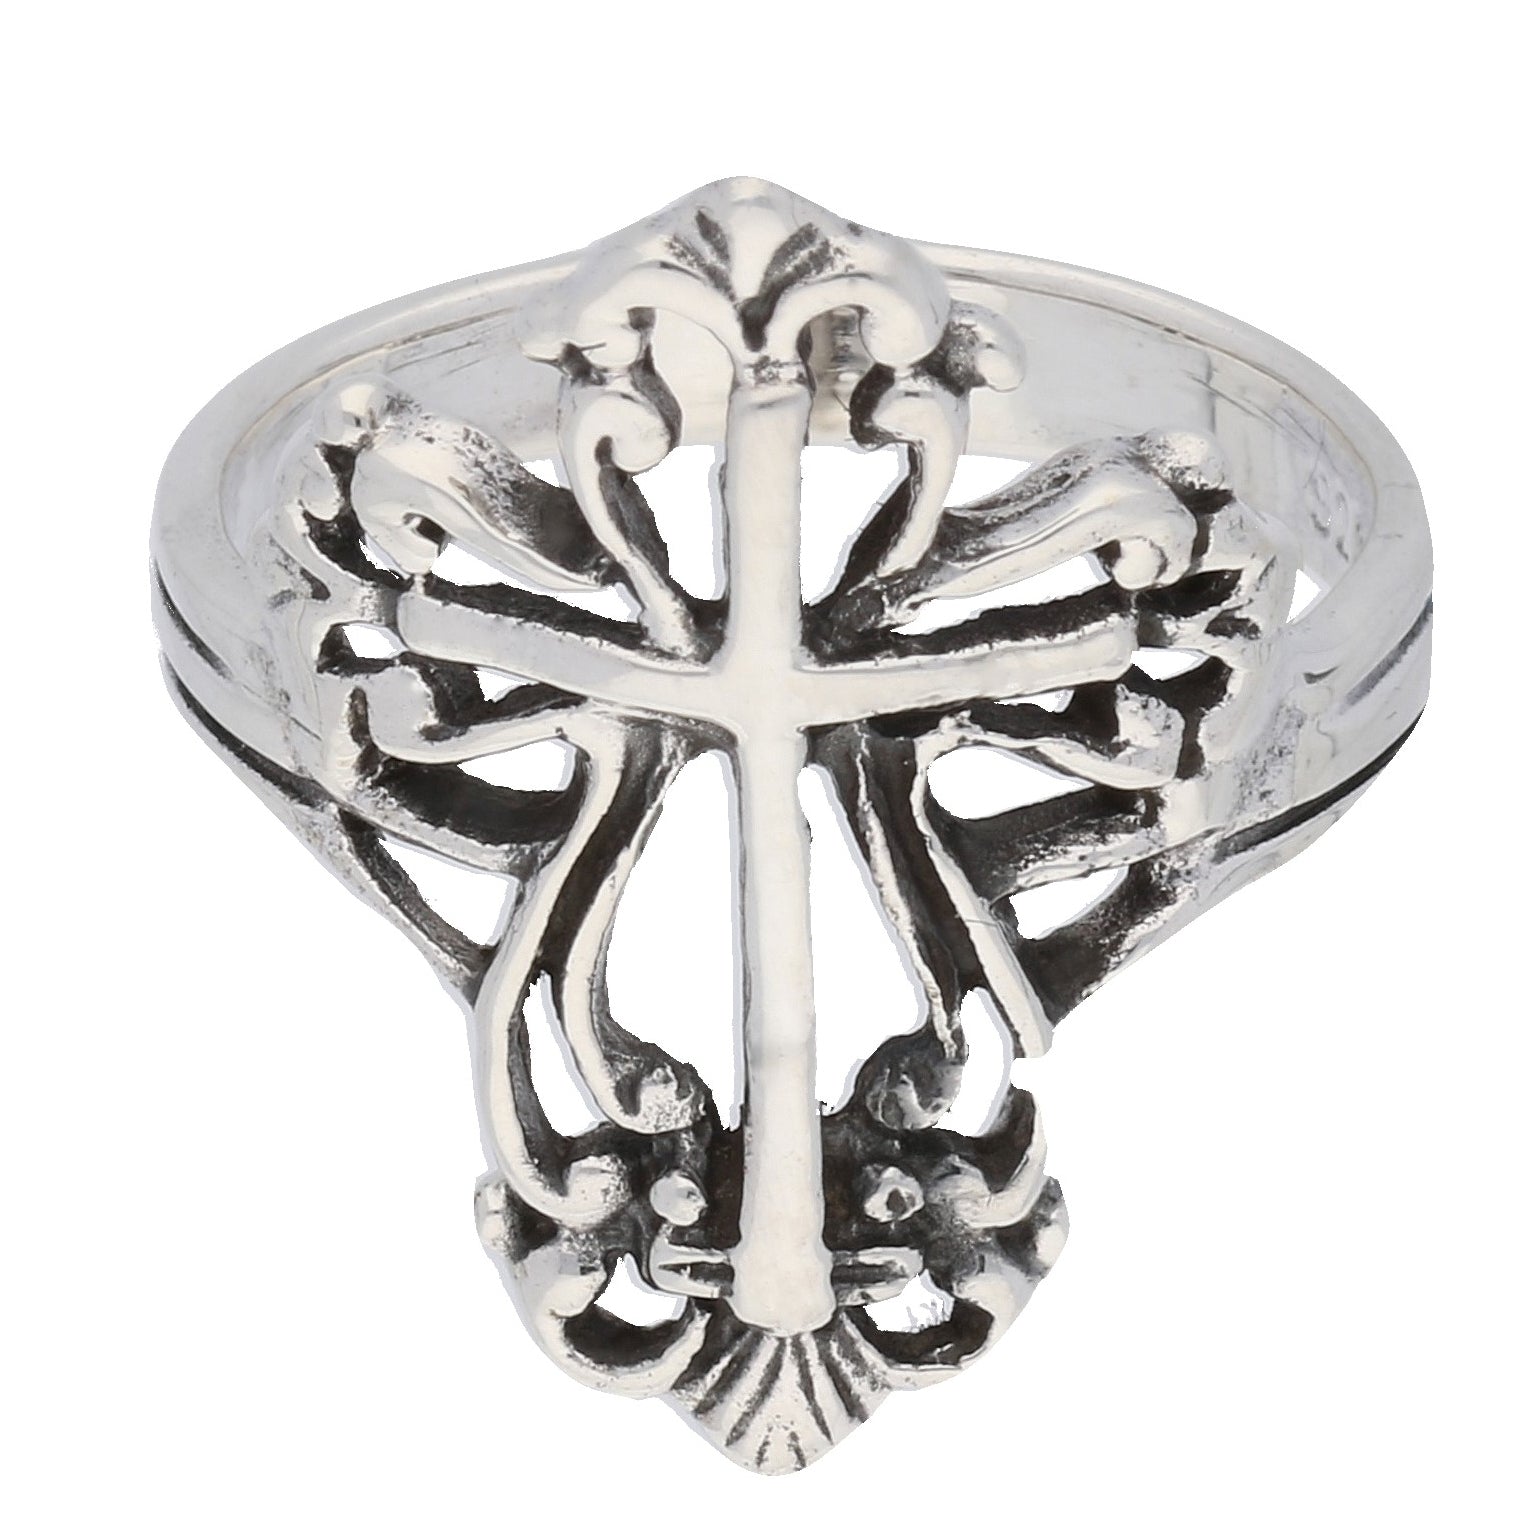 Sterling Silver Victorian Style Open Cross Ring - Silver Insanity